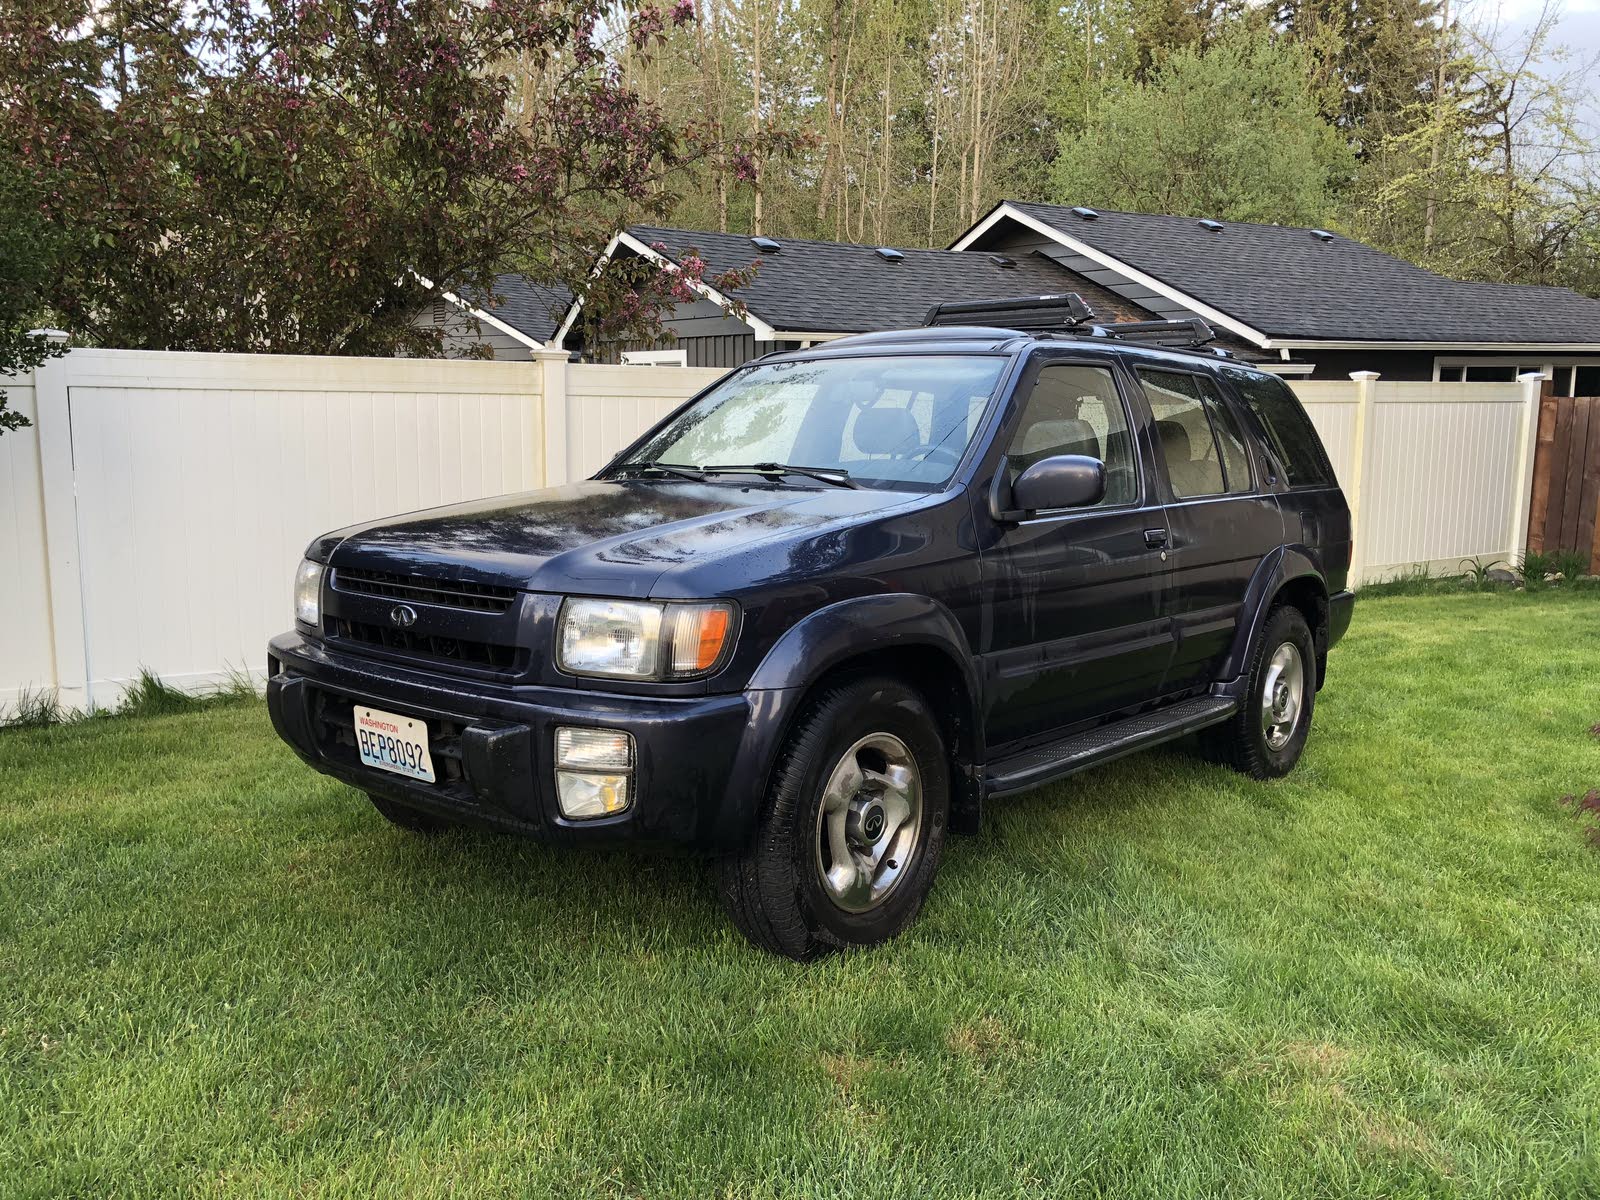 Ford Bronco What rig / vehicle did you give up to get your Bronco? 9 1997 infiniti qx4